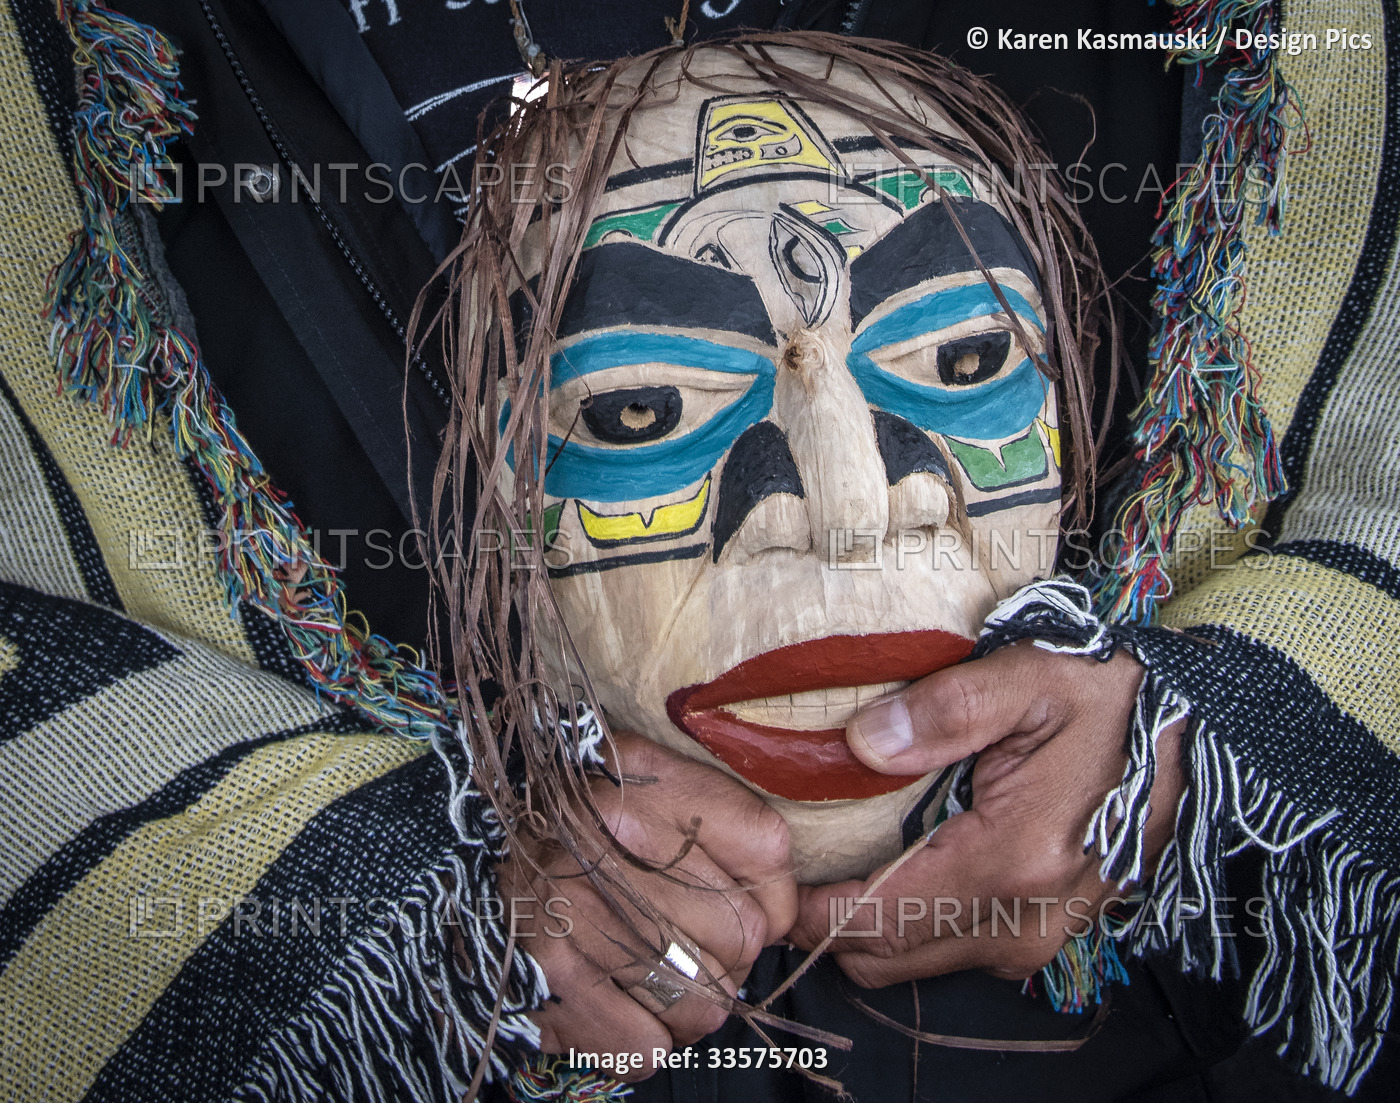 Man stands draped in a blanket with Native Indian design and holding a mask; ...